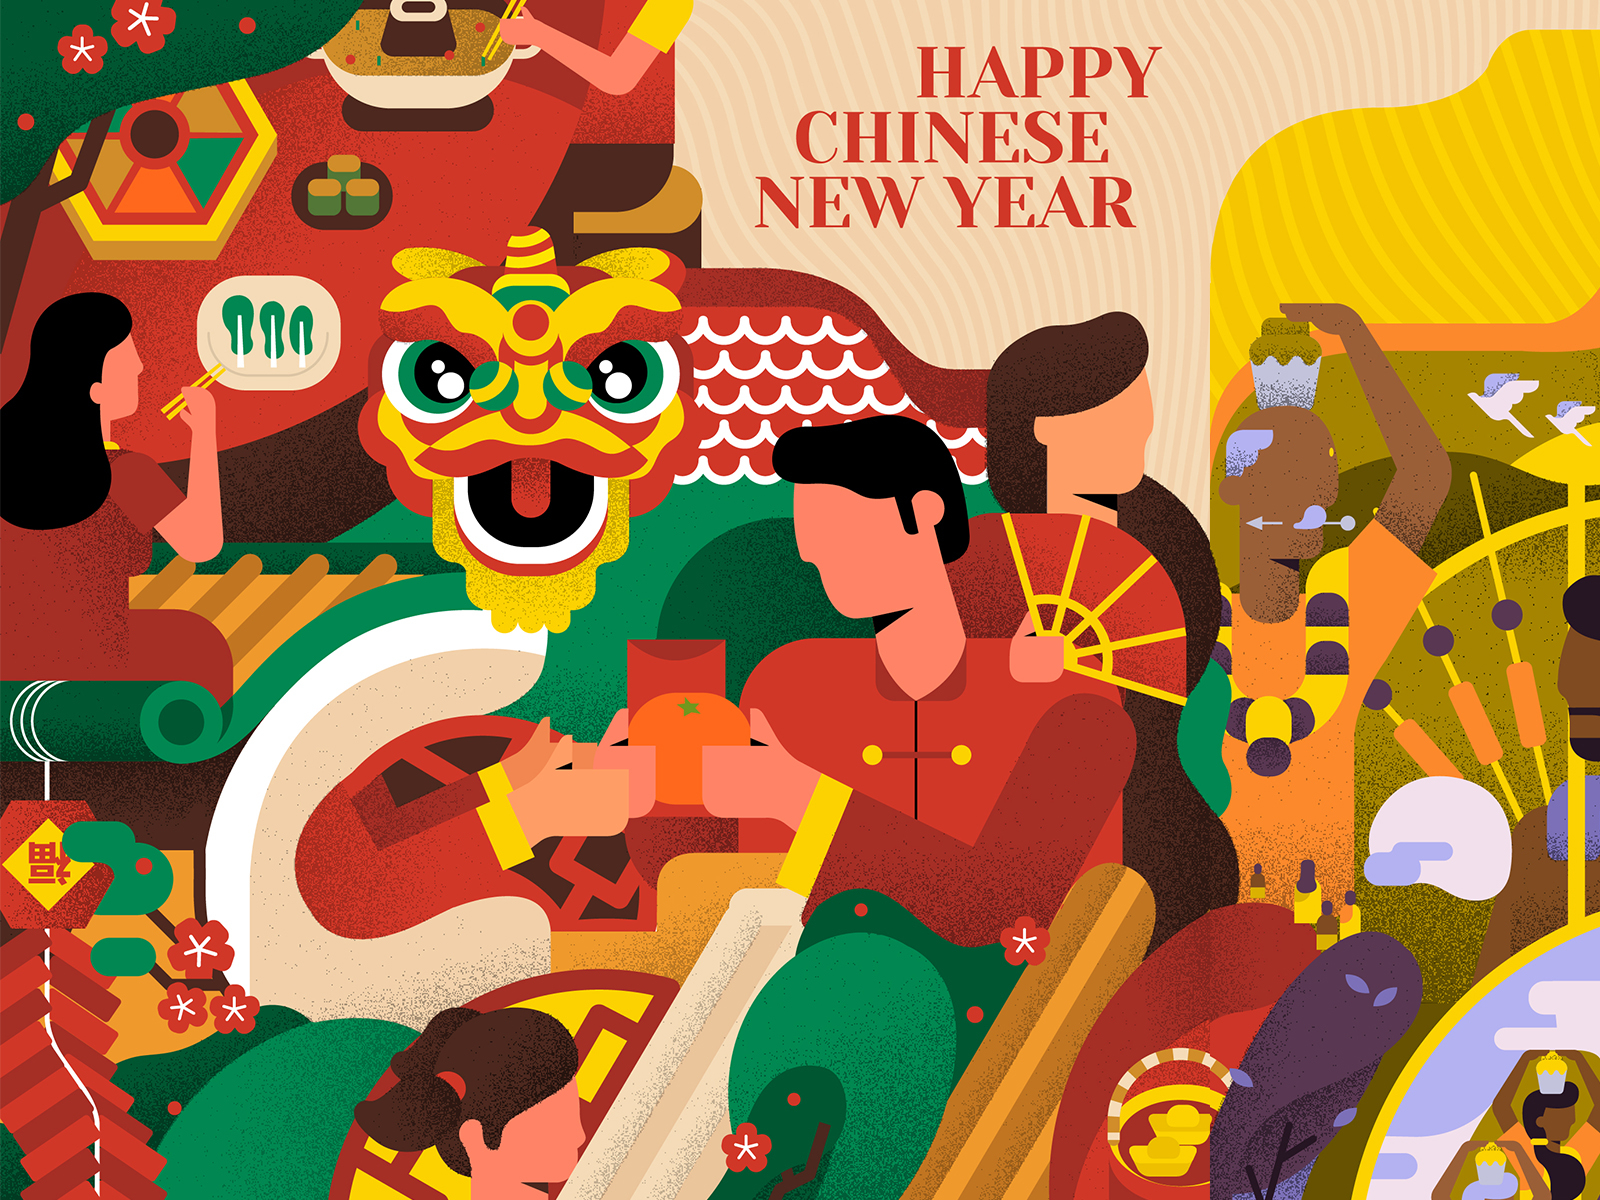 Happy Chinese New Year by Saimen lee on Dribbble